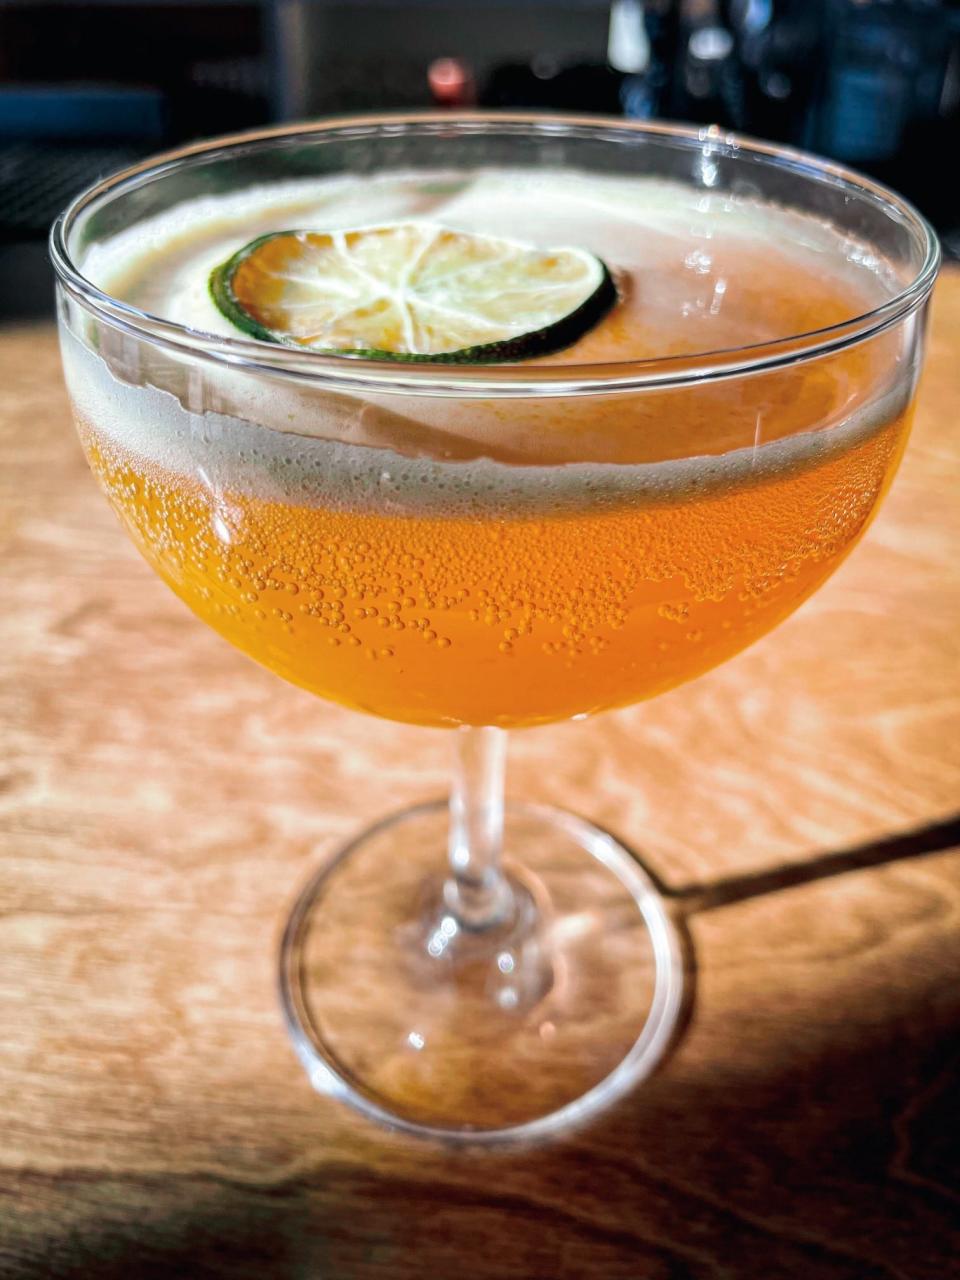 The Burning Passion Margarita at El Mero Taco in Cordova.  This smoky and sweet margarita is made with mezcal, passion fruit puree and smoked habanero.